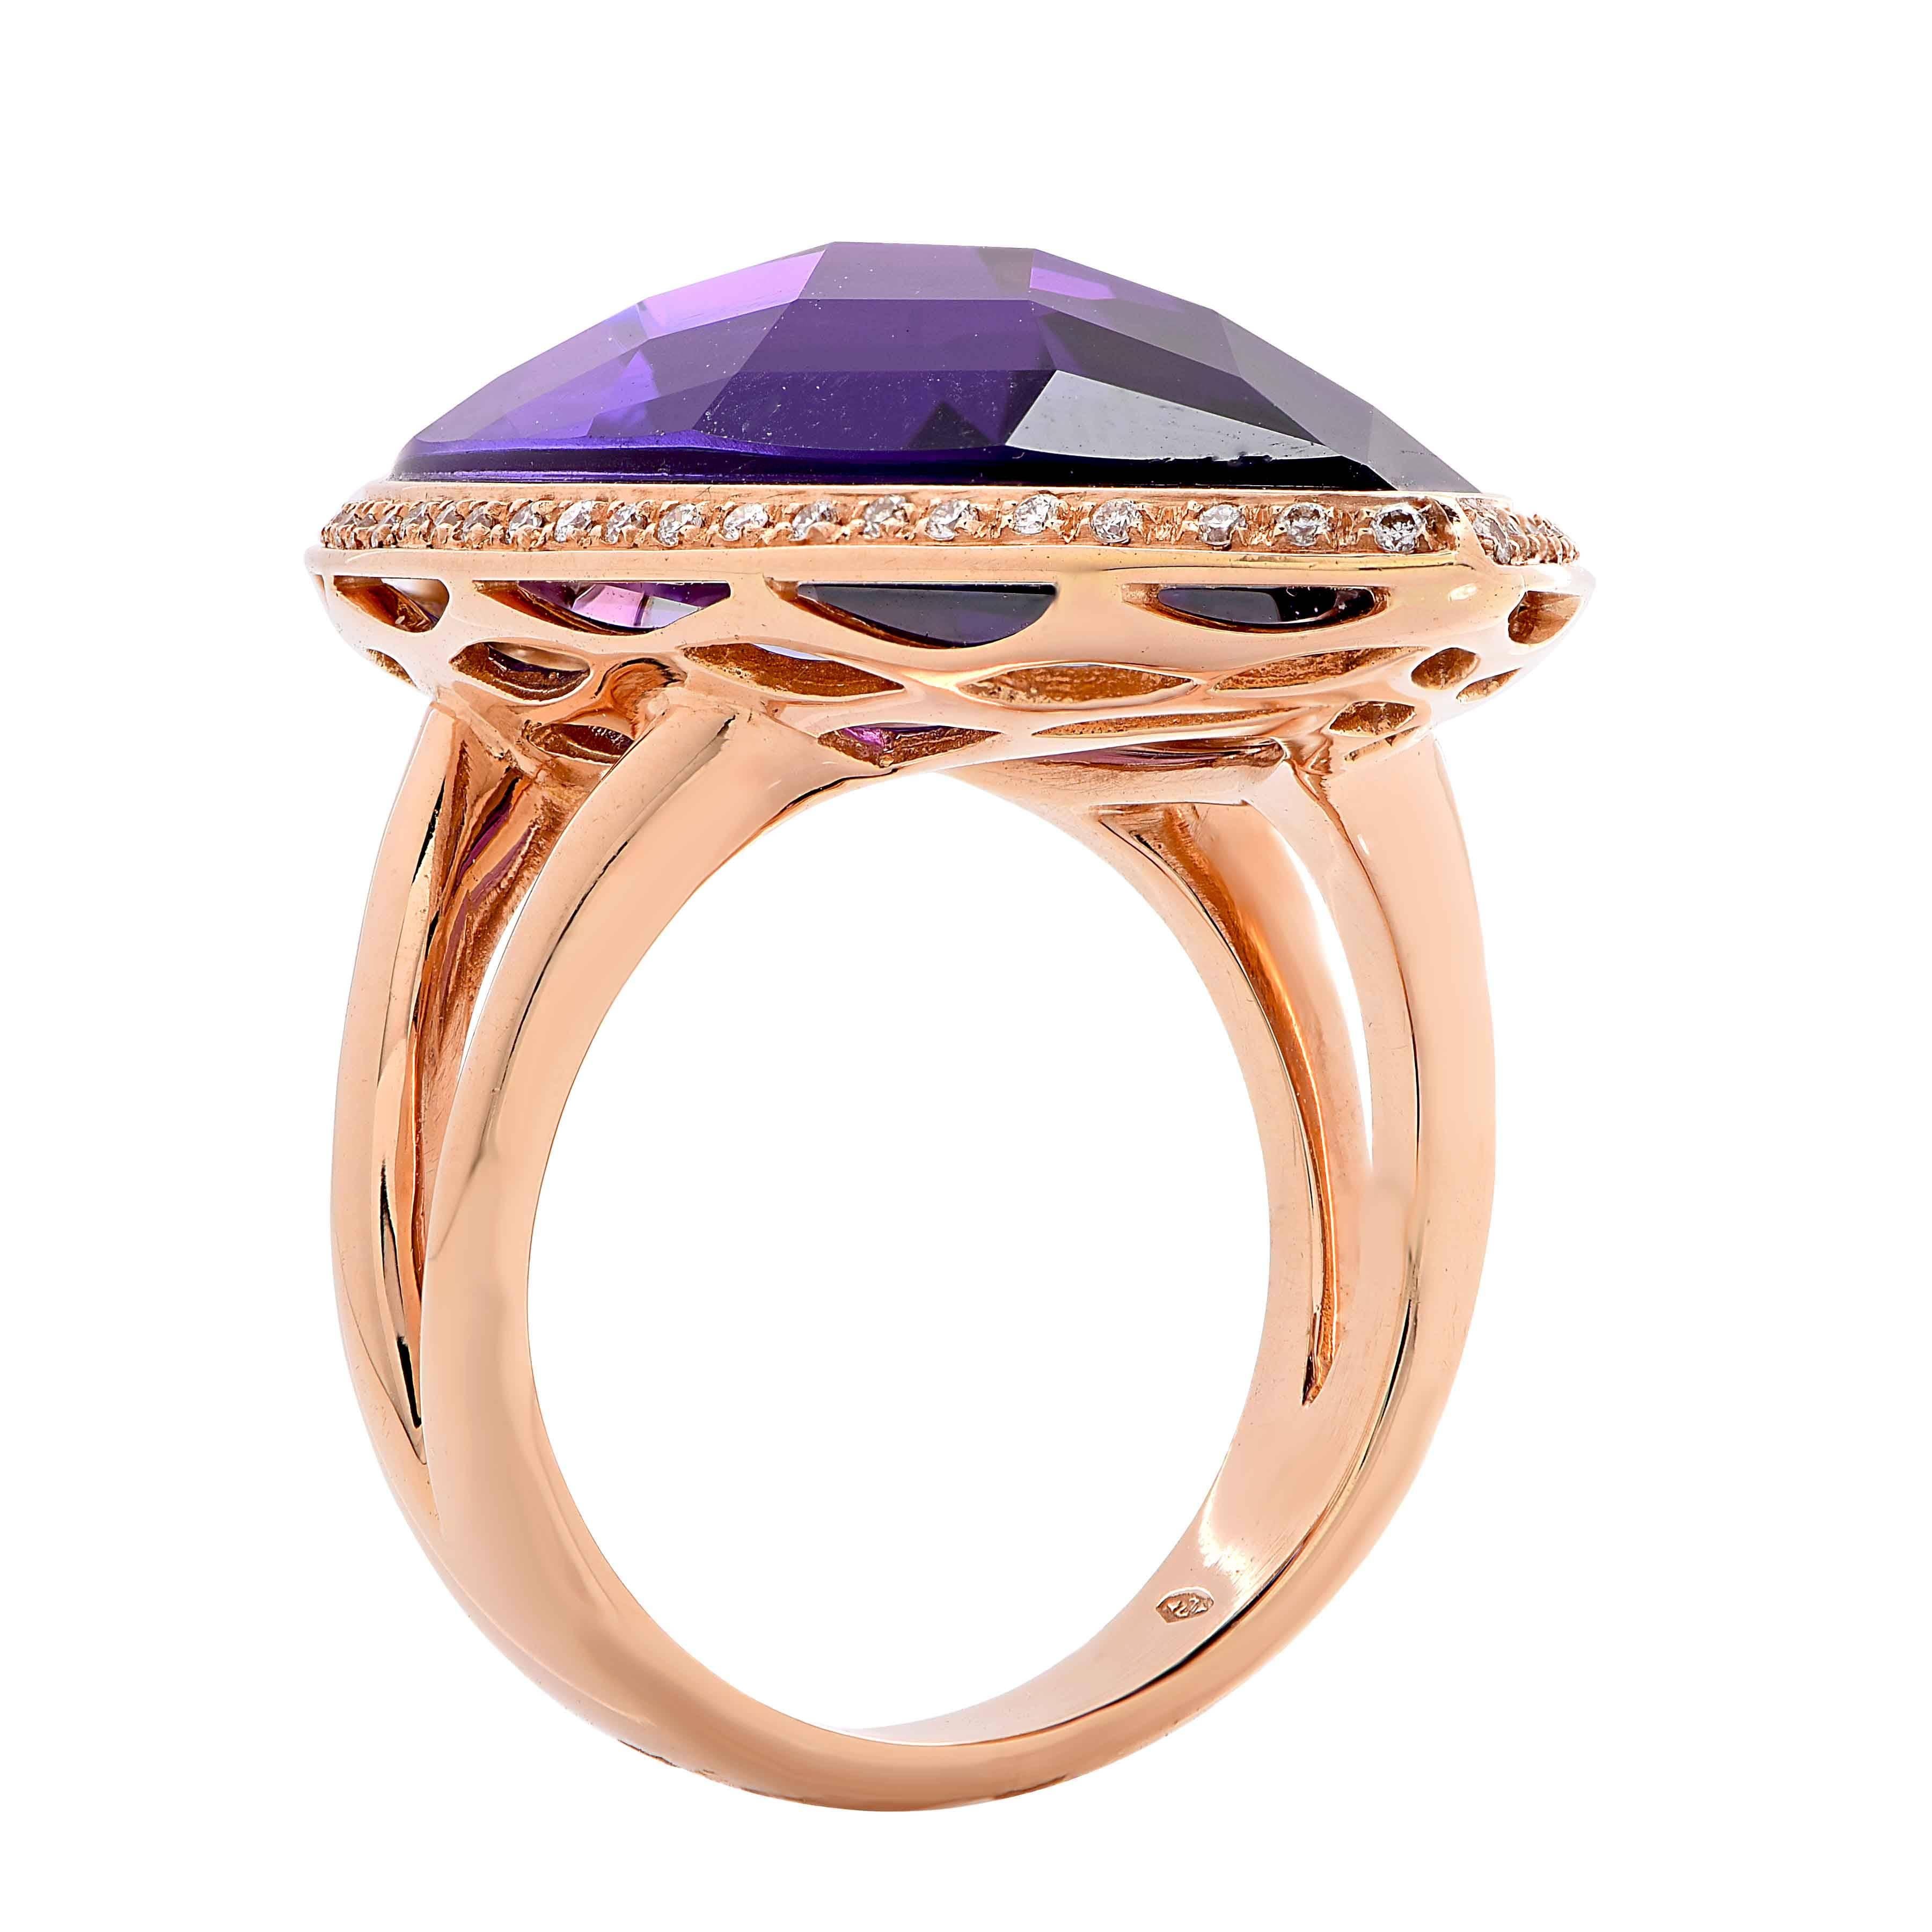 23 Carat Natural Amethyst & Diamond 18 Karat Rose Gold Ring In New Condition For Sale In Bay Harbor Islands, FL